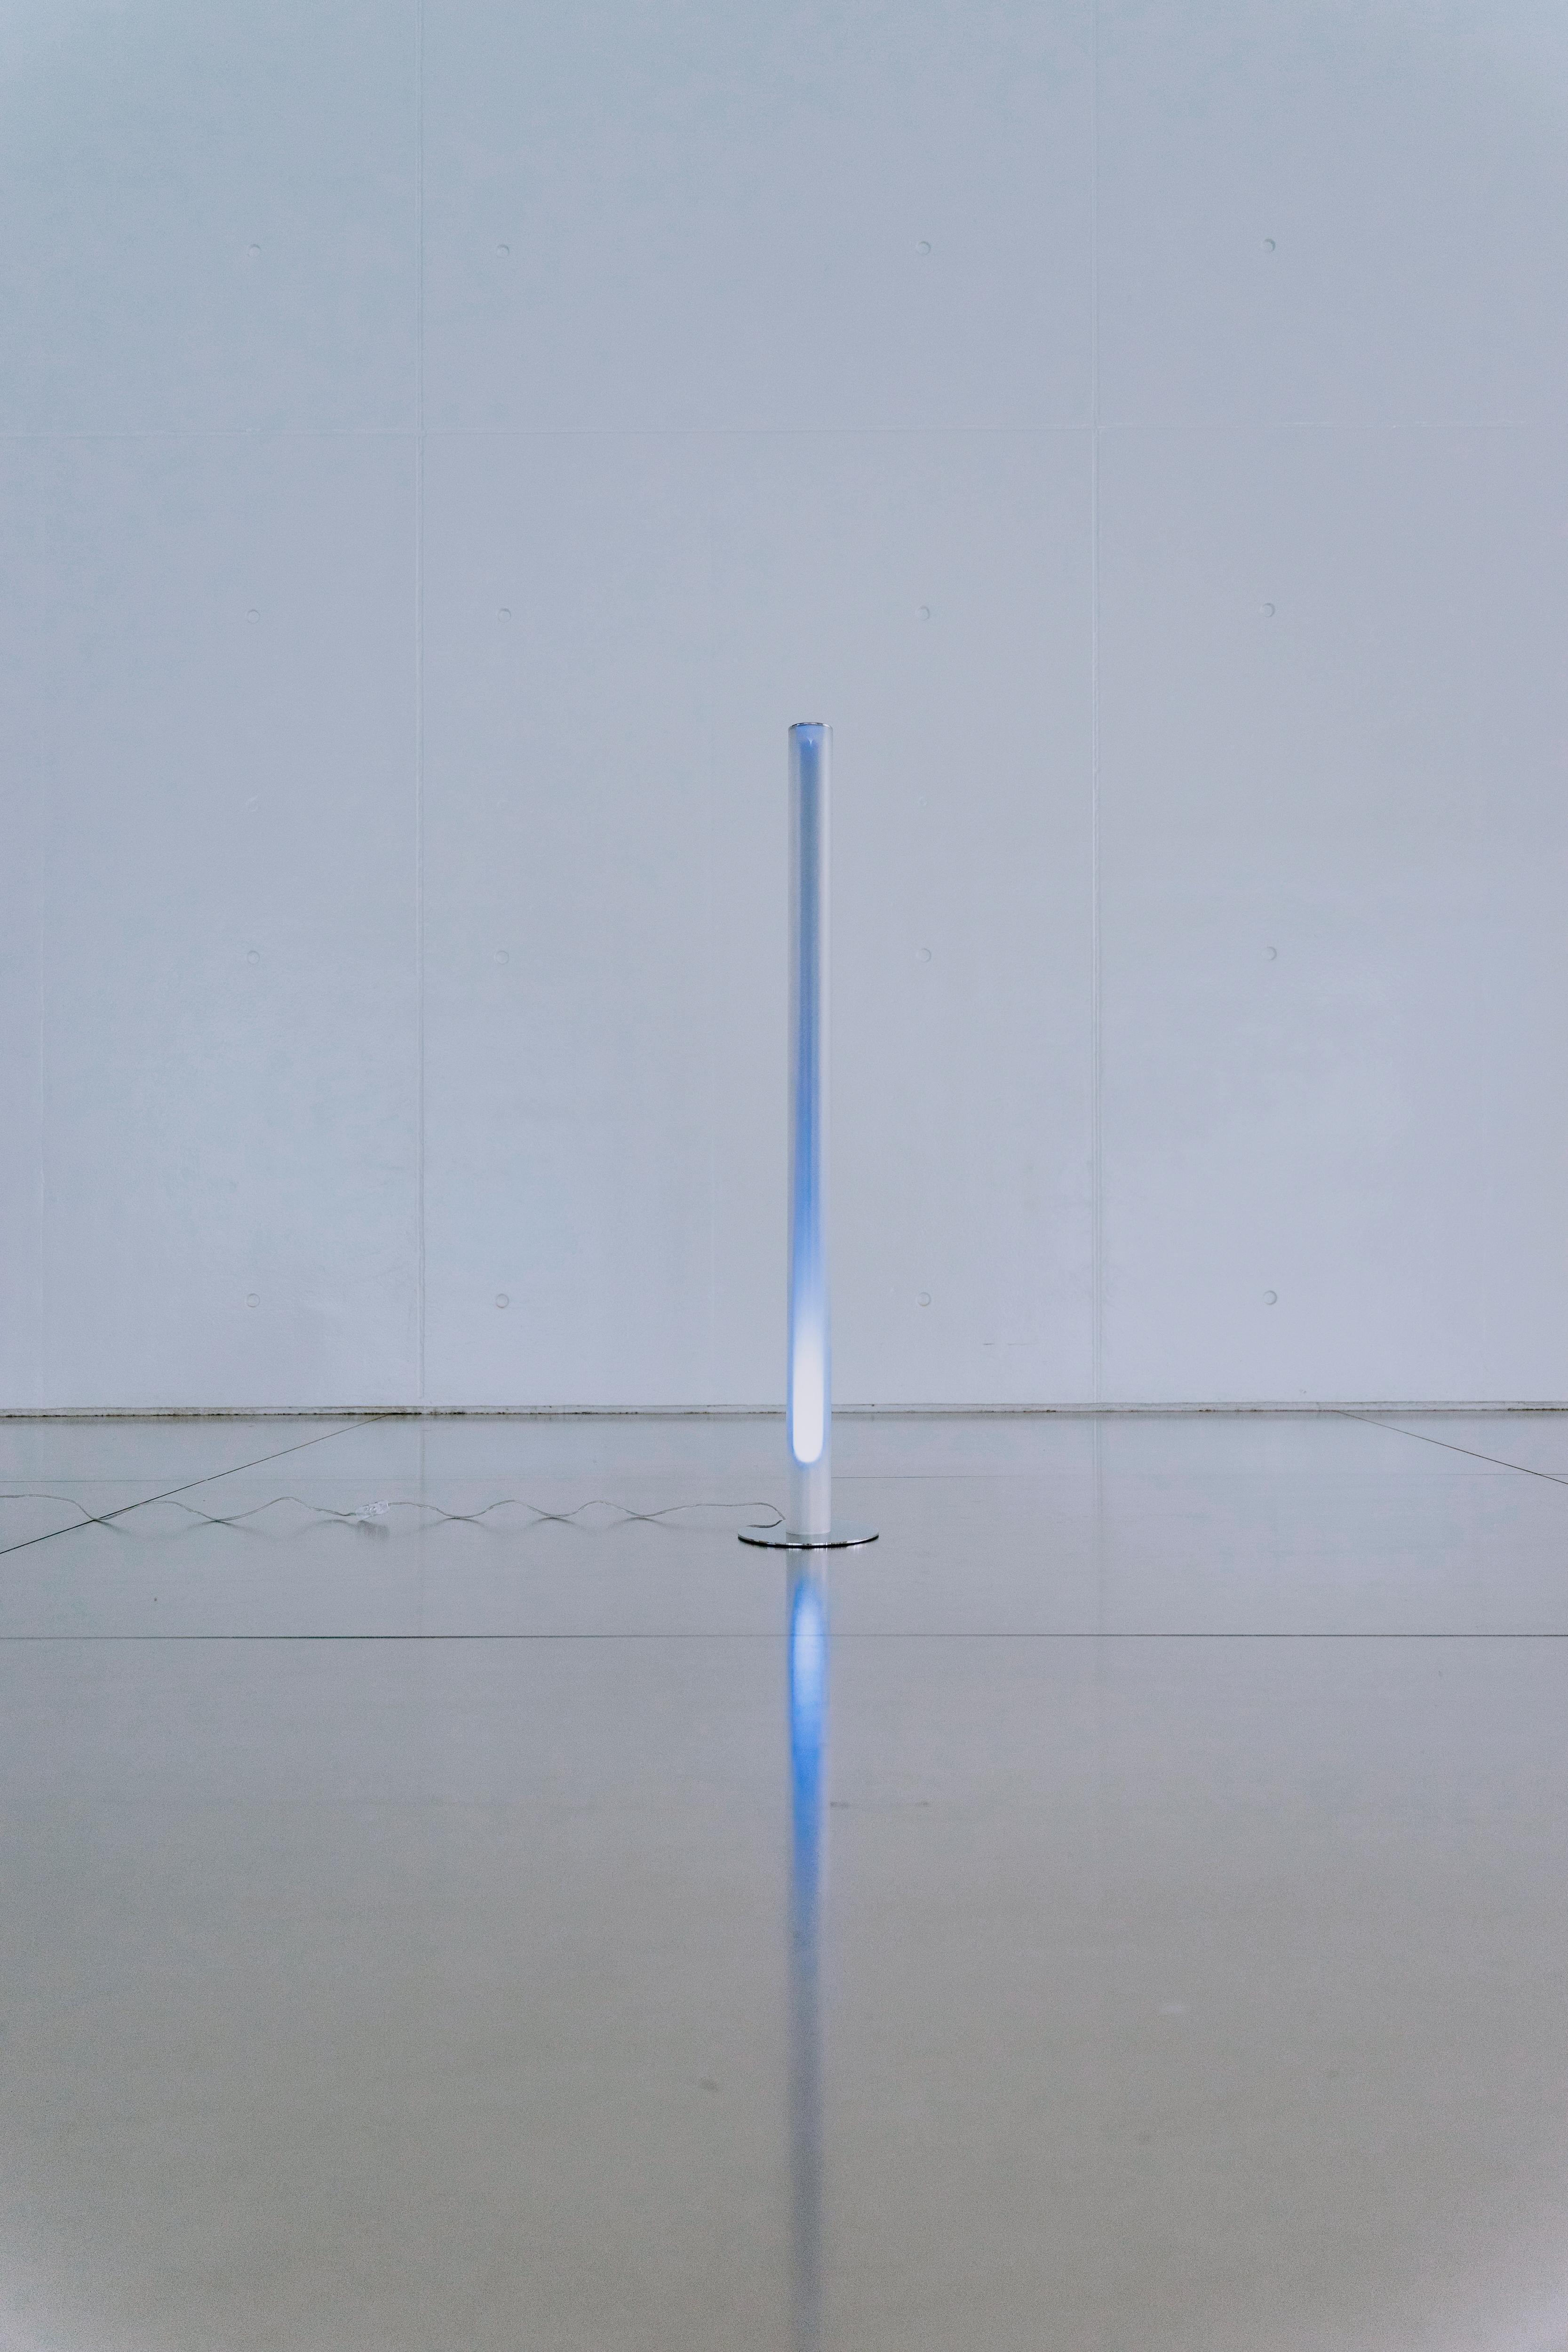 Light pillar floor light by Amber Dewaele
Dimensions: D 25 x W 25 x H 141 cm.
Materials: Acrylic and polished stainless steel.
Available with a frosted or clear Acrylic tube. Please contact us.

Light Pillar Floor Light
A floor light that